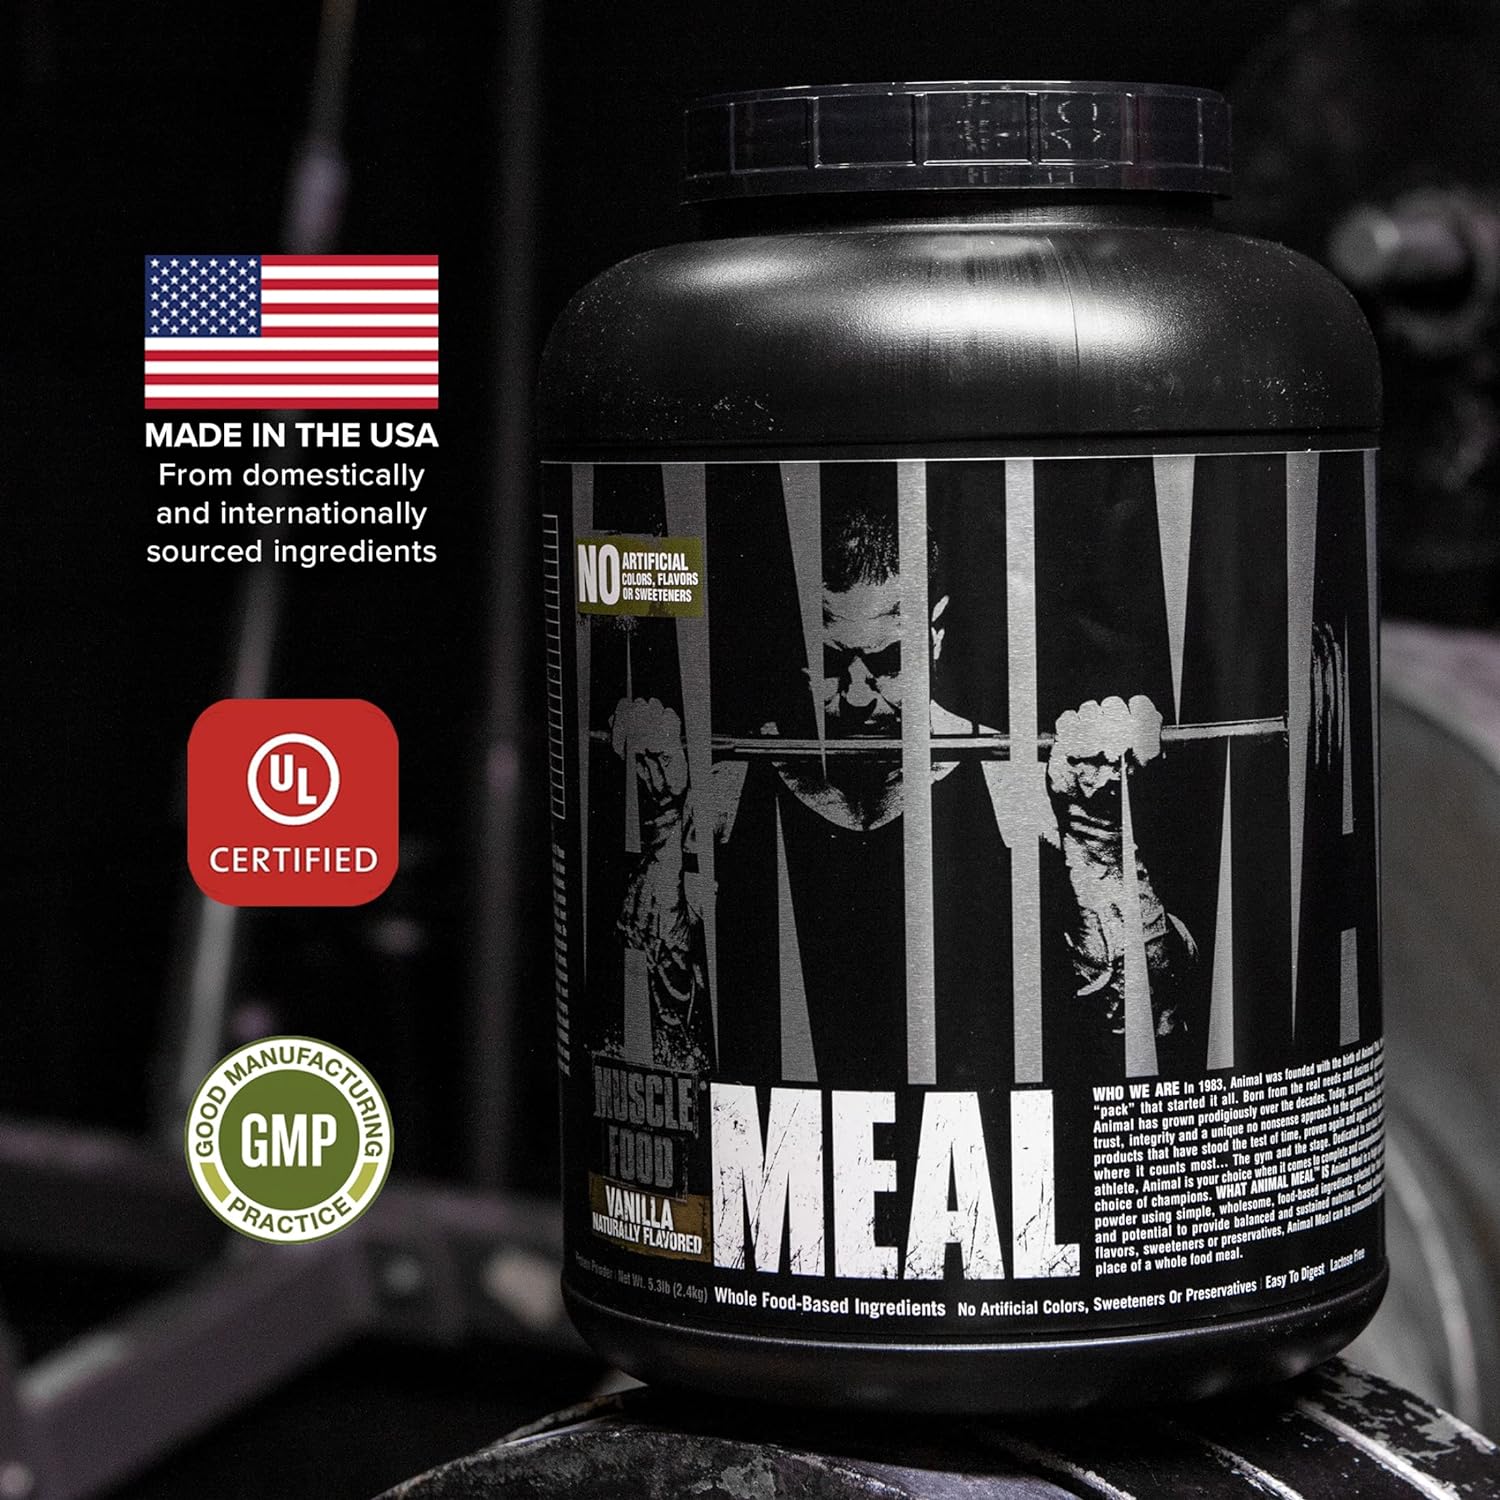 Animal Meal - All Natural High Calorie Meal Shake - Egg Whites, Beef Protein, Pea Protein, Vanilla